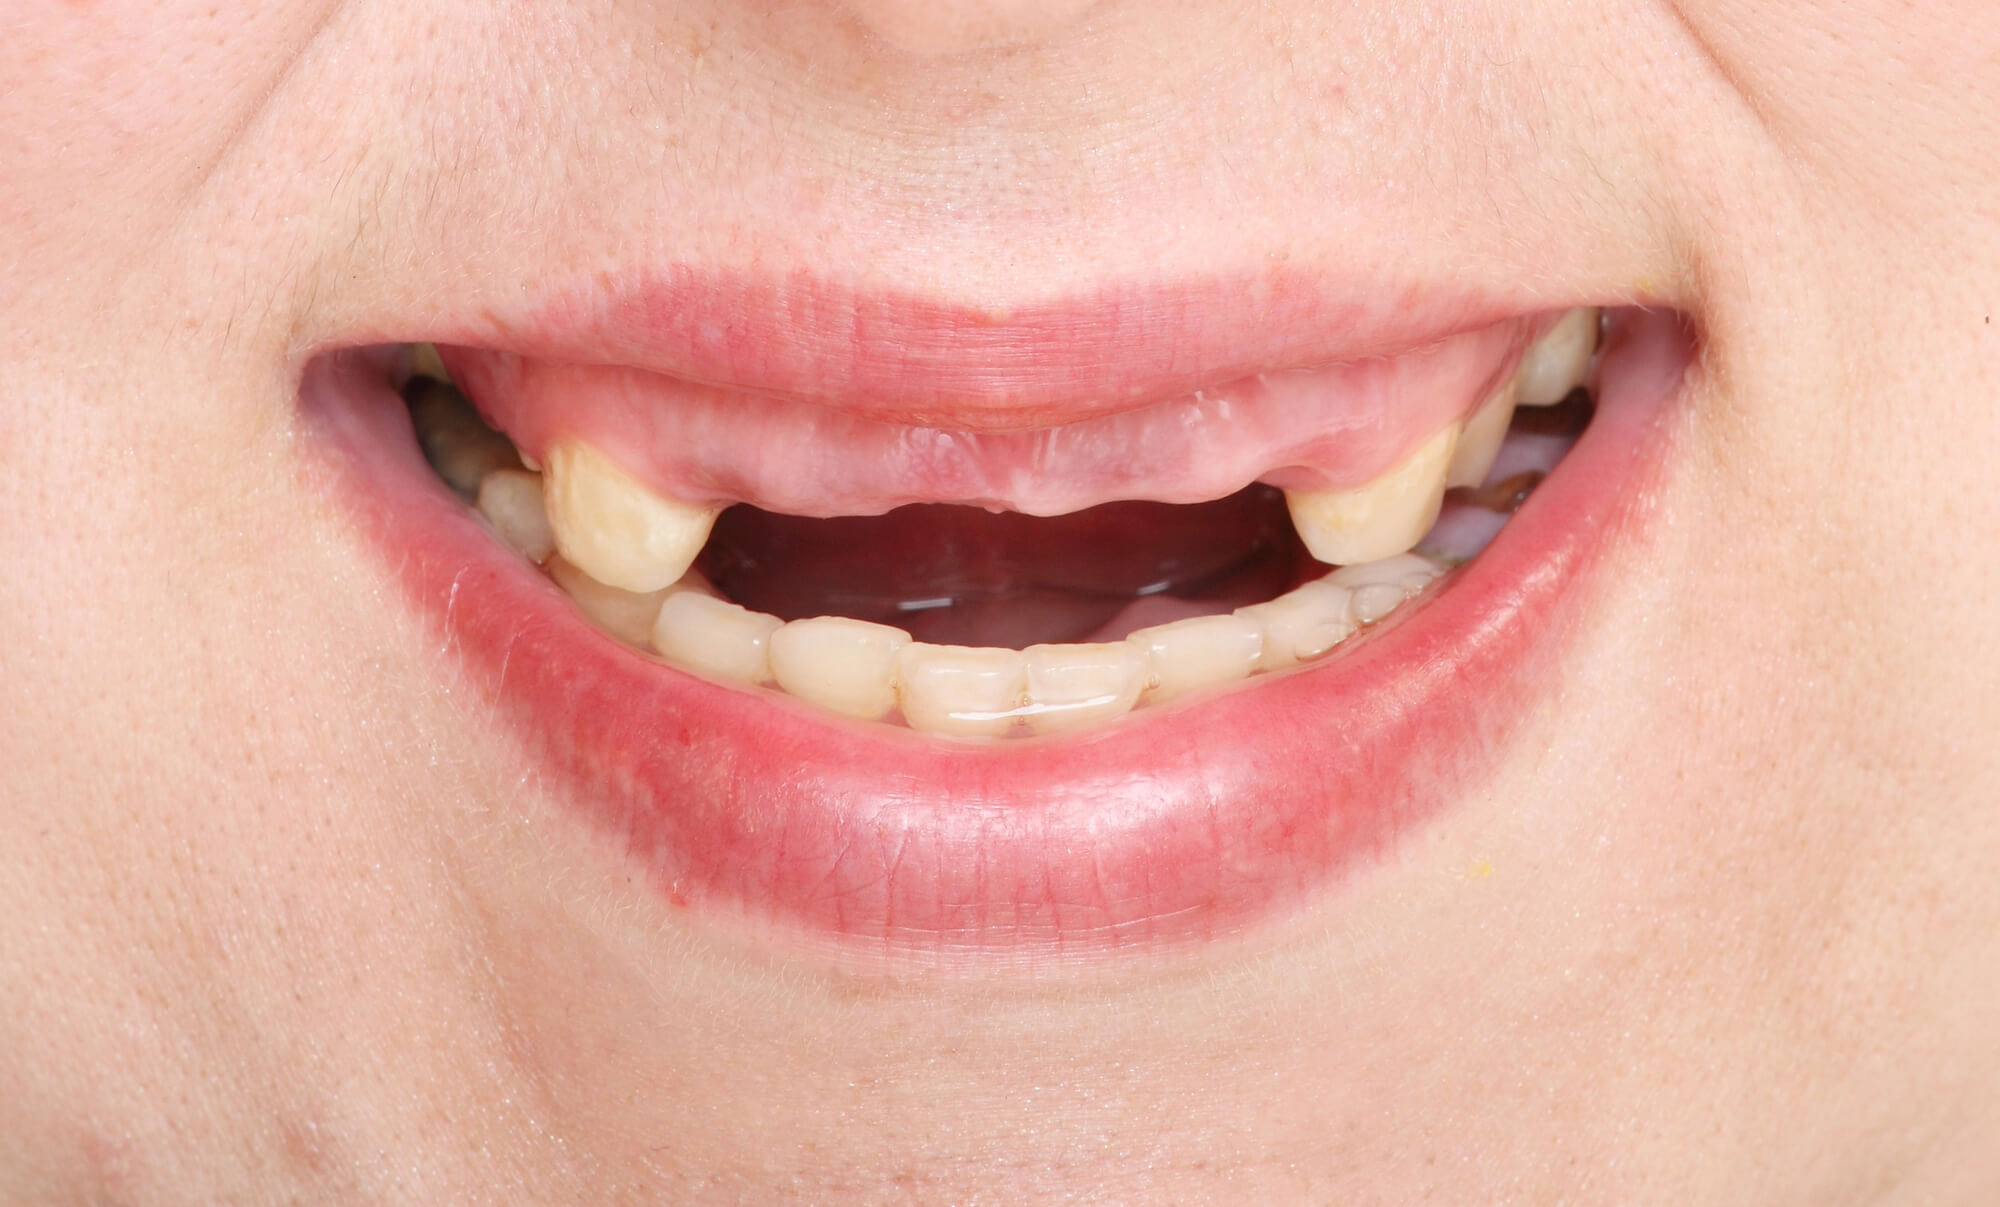 What Is the Full Impact of Missing Teeth?